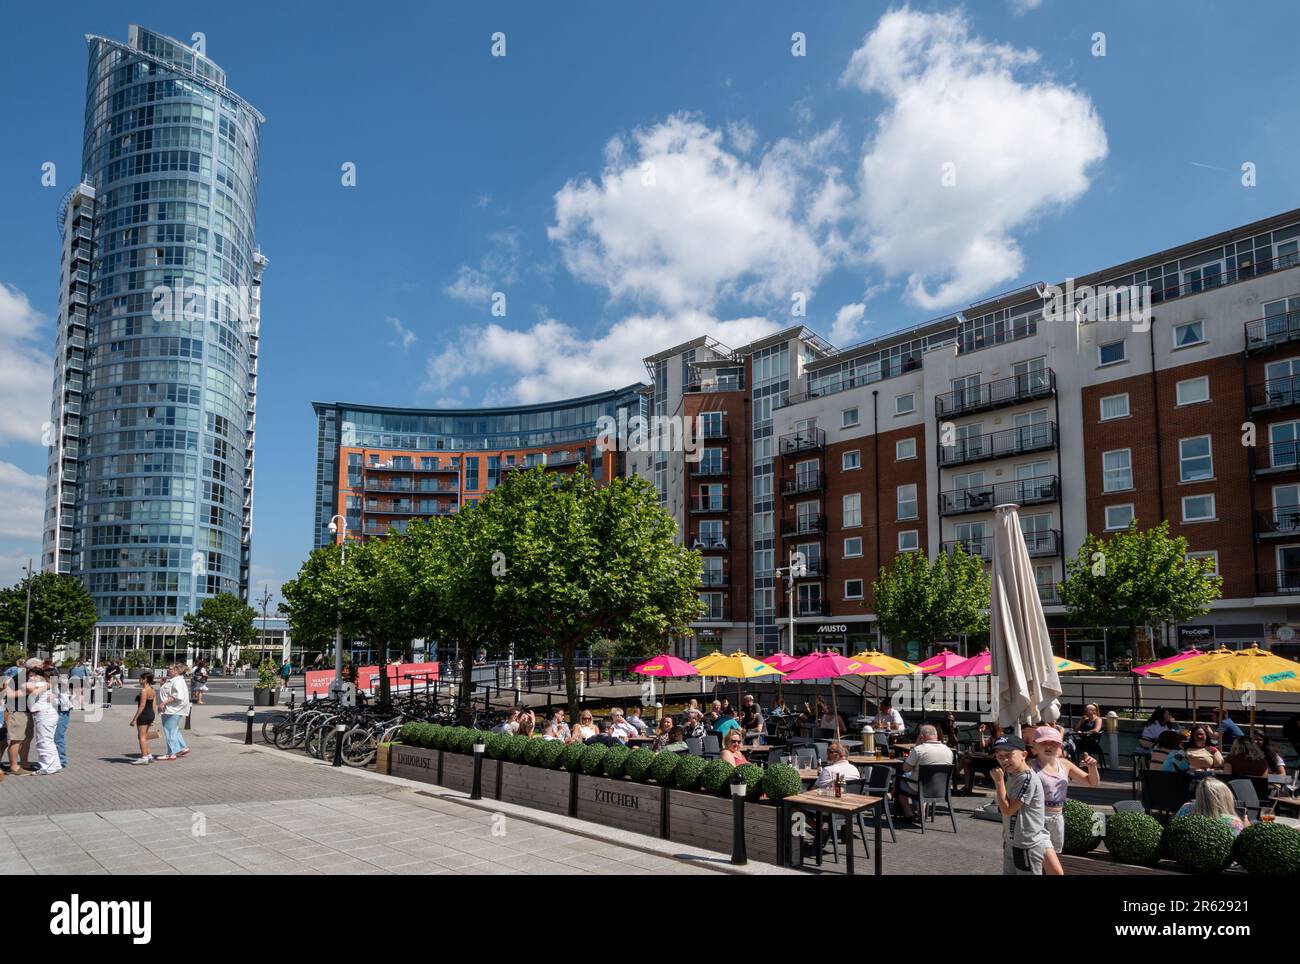 Gunwharf Quays in Portsmouth, Hampshire, England, UK, on a busy Saturday afternoon in June with people relaxing and enjoying the outdoor cafes Stock Photo